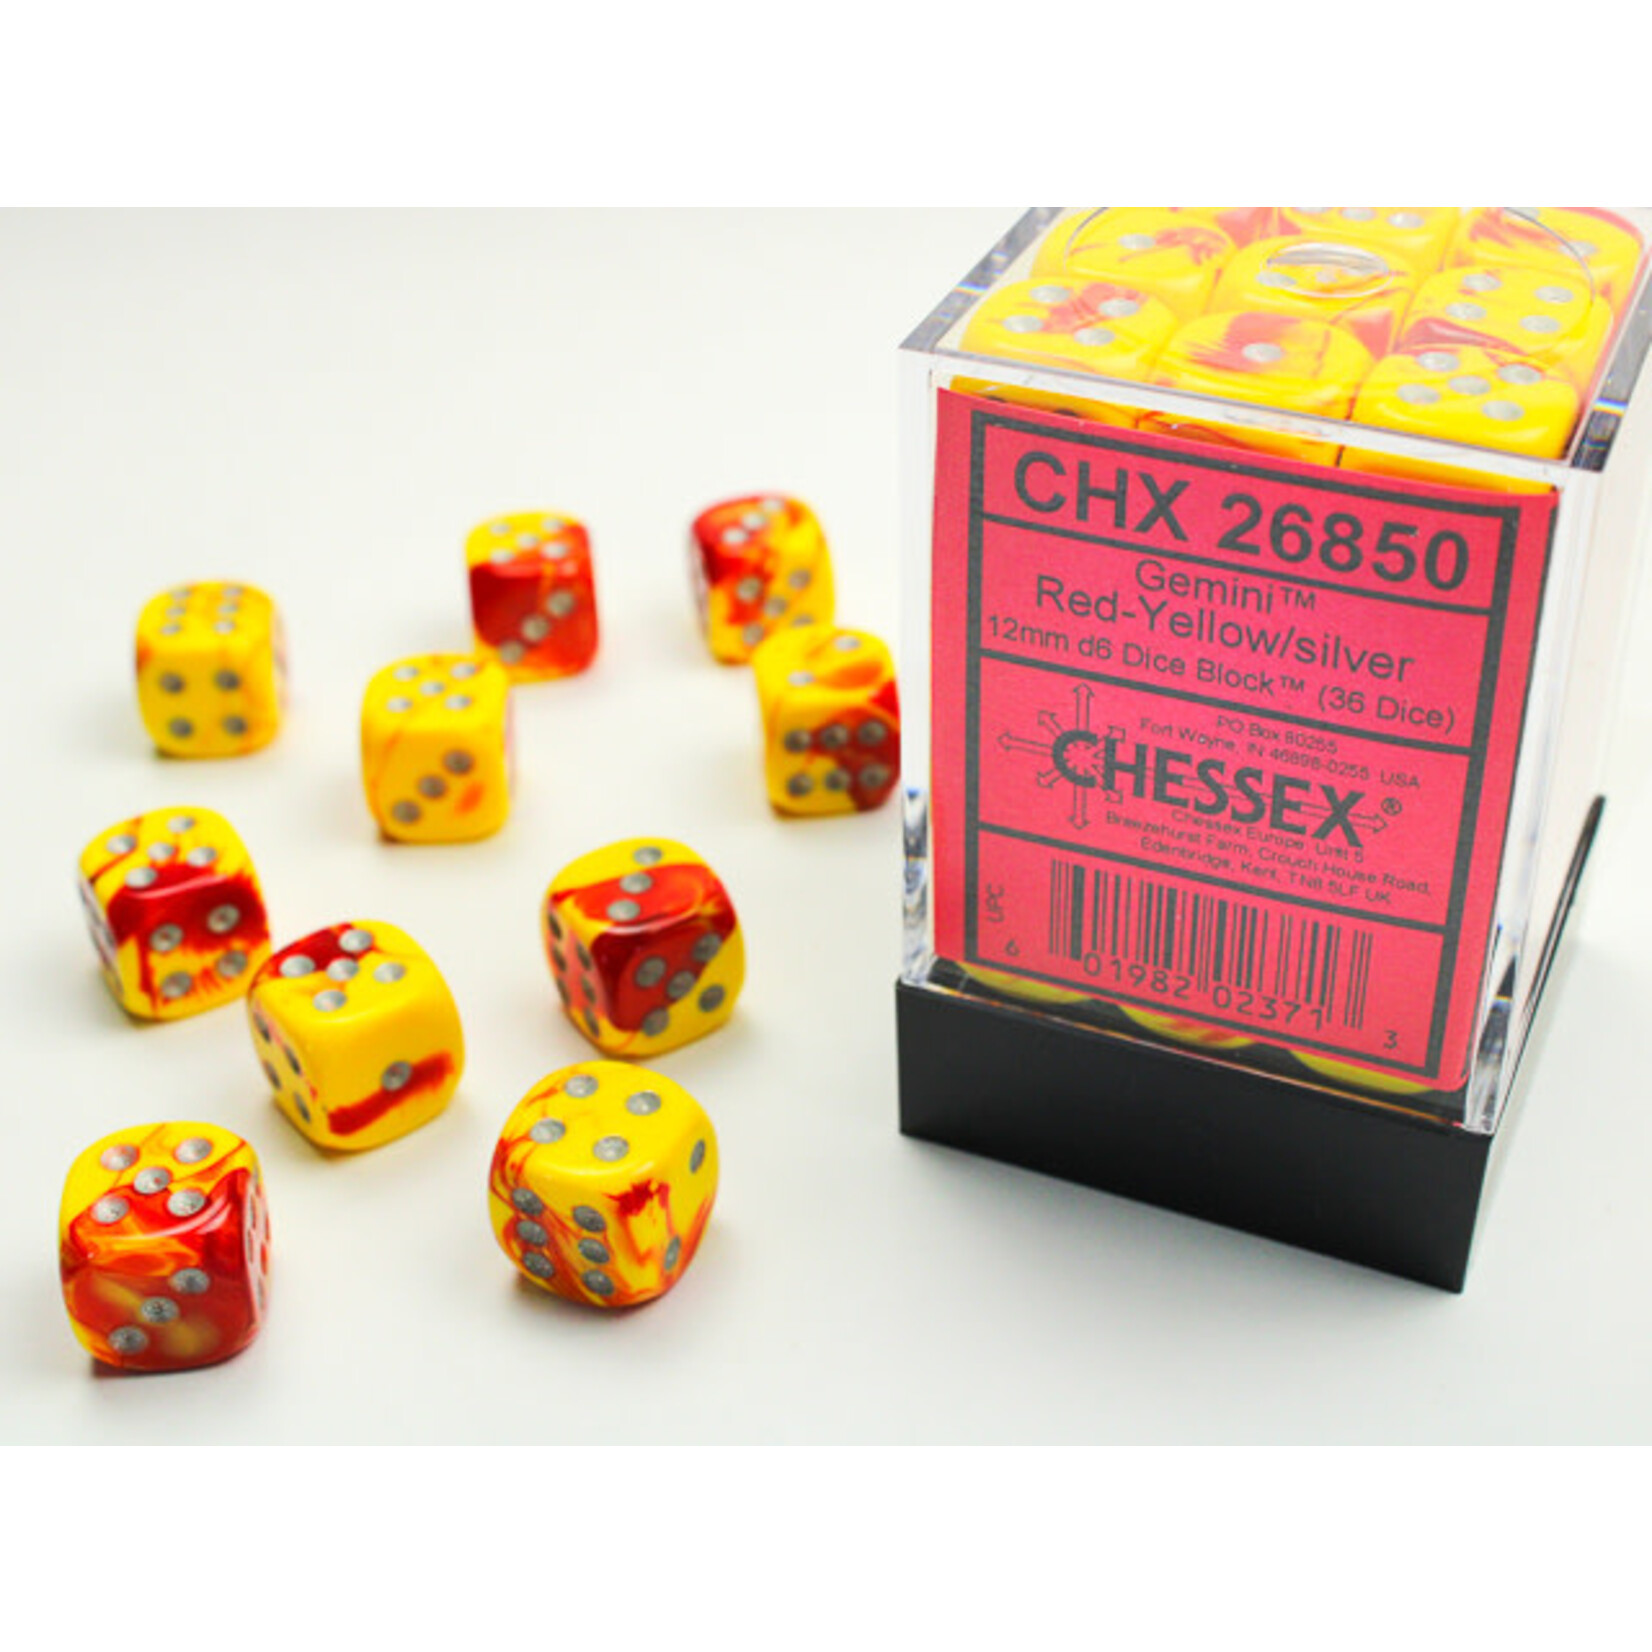 Chessex Dice 12mm 26850 36pc Gemini Red-Yellow/Silver